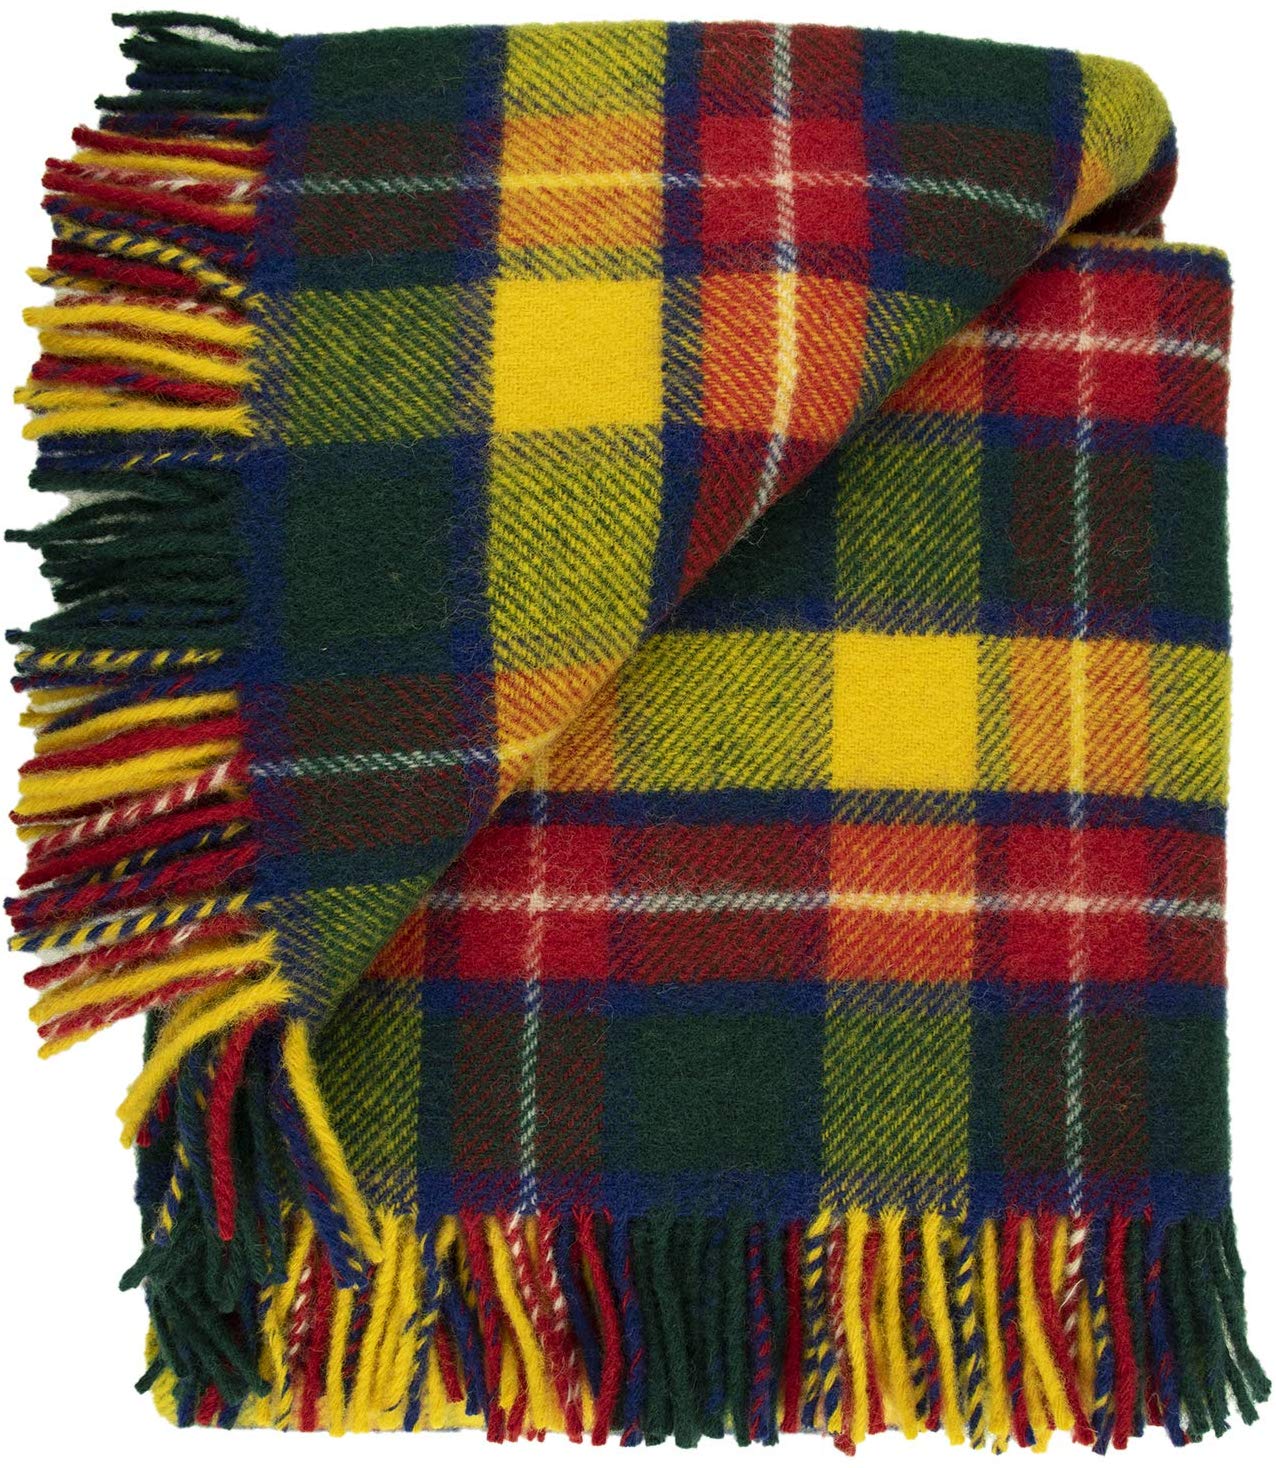 Prince of Scots Highland Tweed Pure New Wool Fluffy Throw ~ Bright Buchanan ~-Throws and Blankets-00810032750220-K40050018-004-Prince of Scots